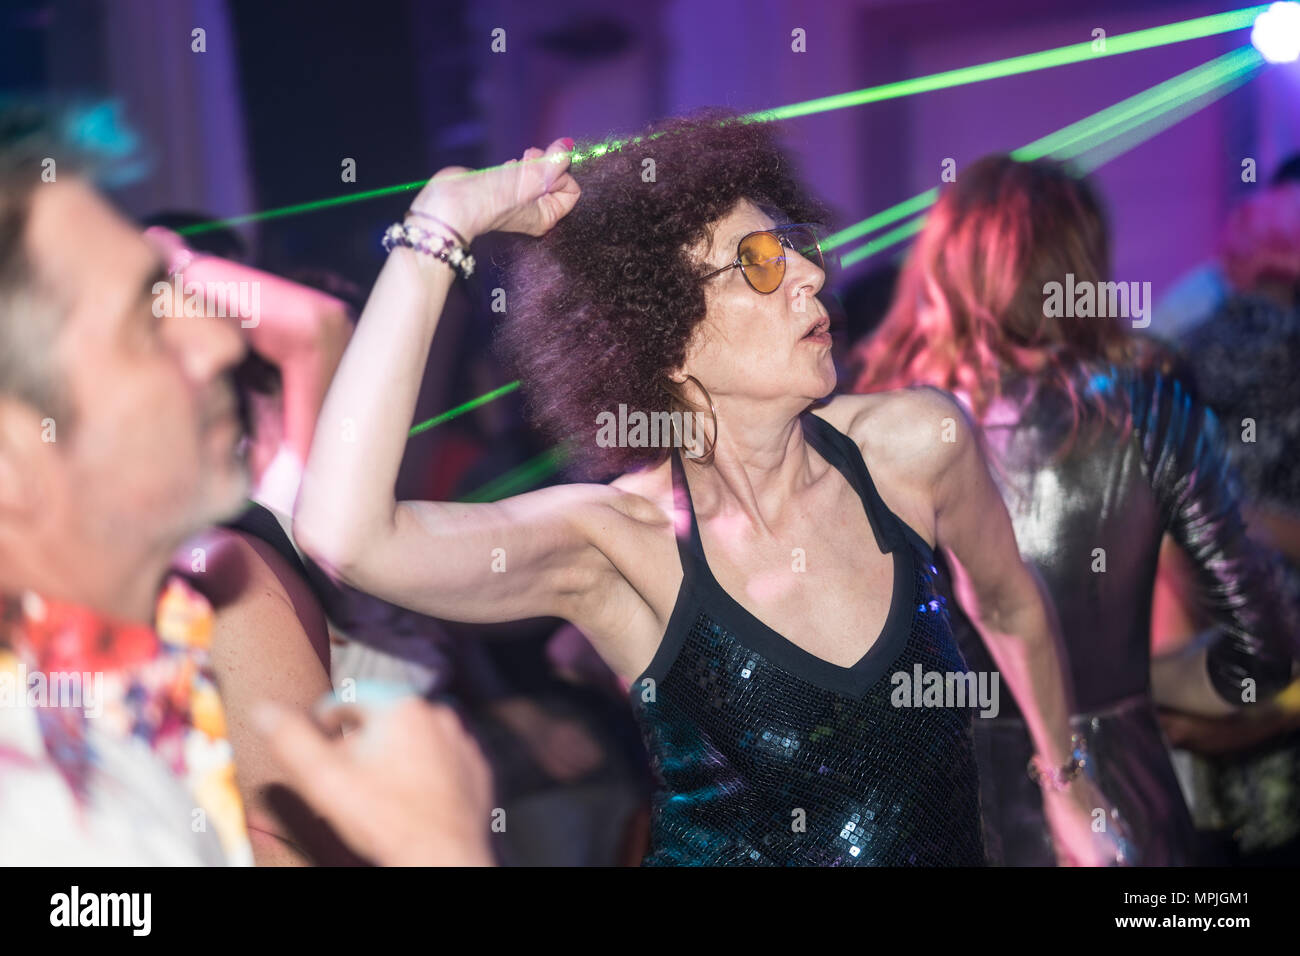 Party goers at the Sheene Resistance's Lost in Disco Night at Bush Hall in London. Photo date: Saturday, May 19, 2018. Photo: Roger Garfield/Alamy Stock Photo